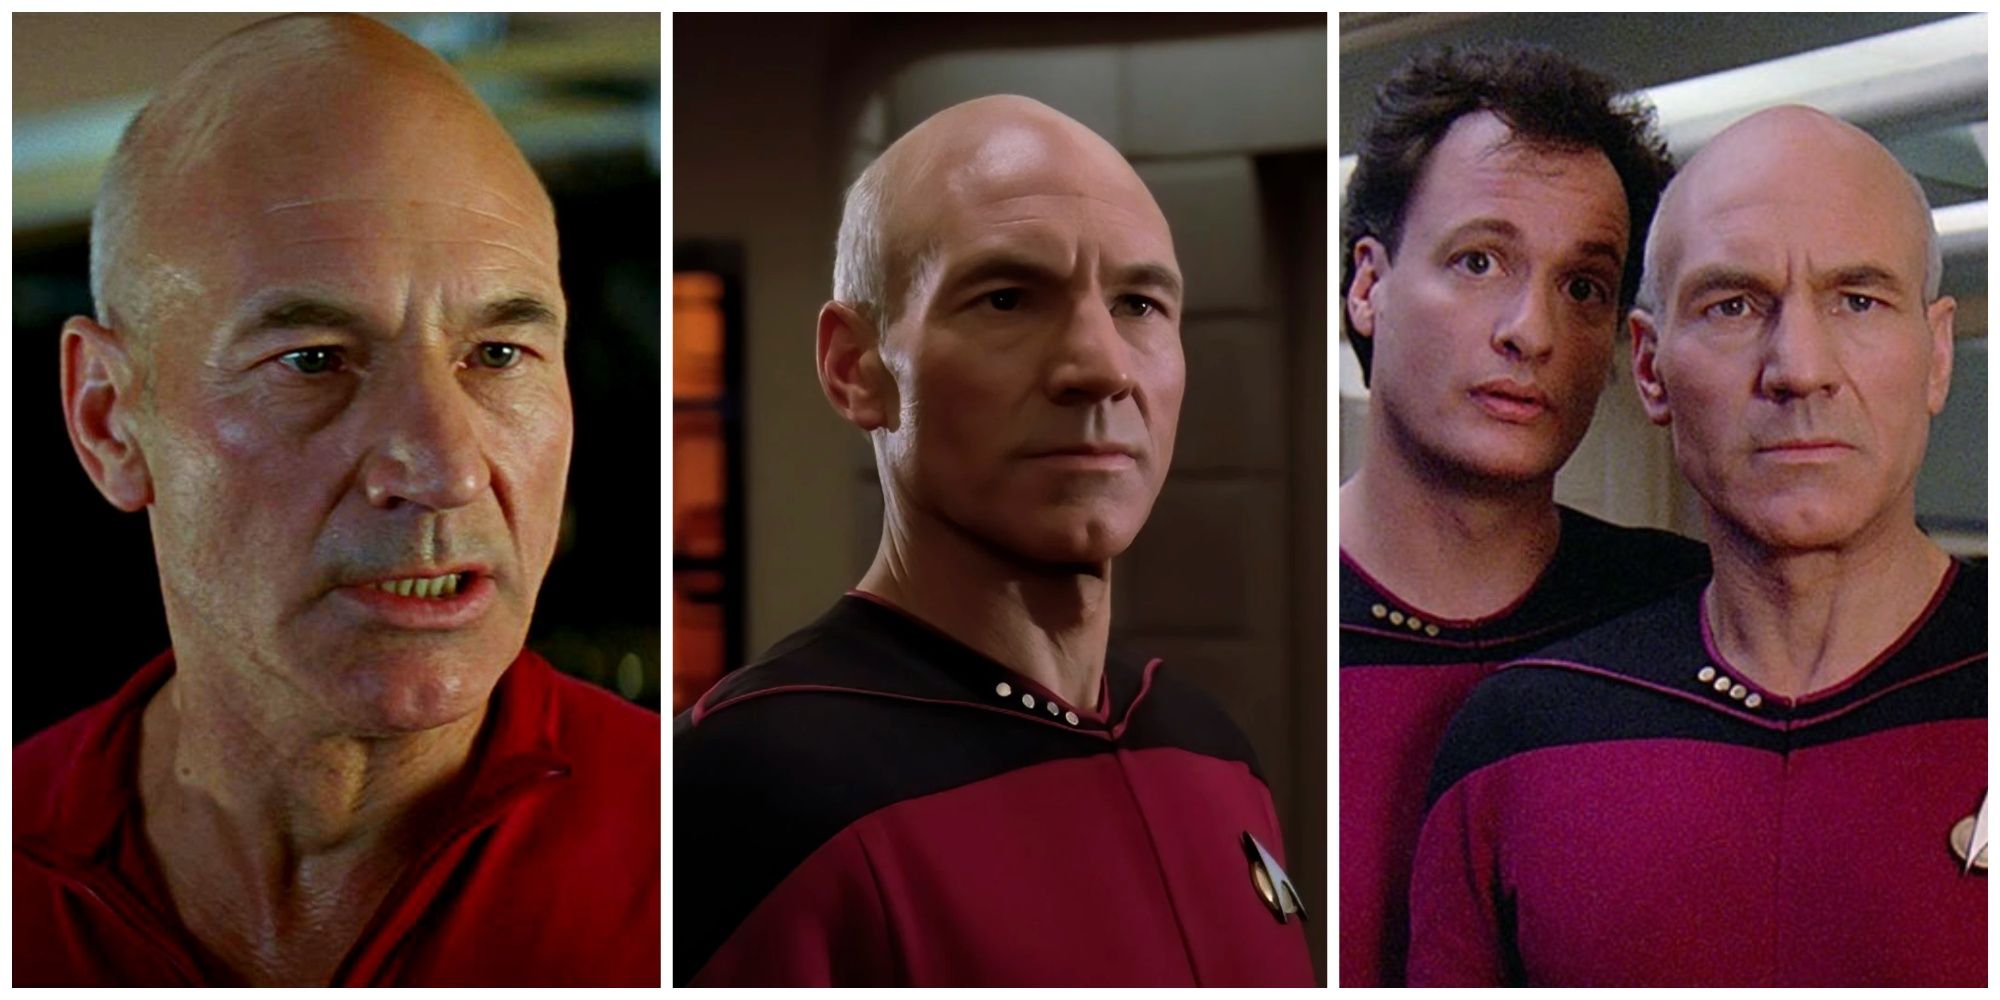 Captain Picard in The Next Generation.